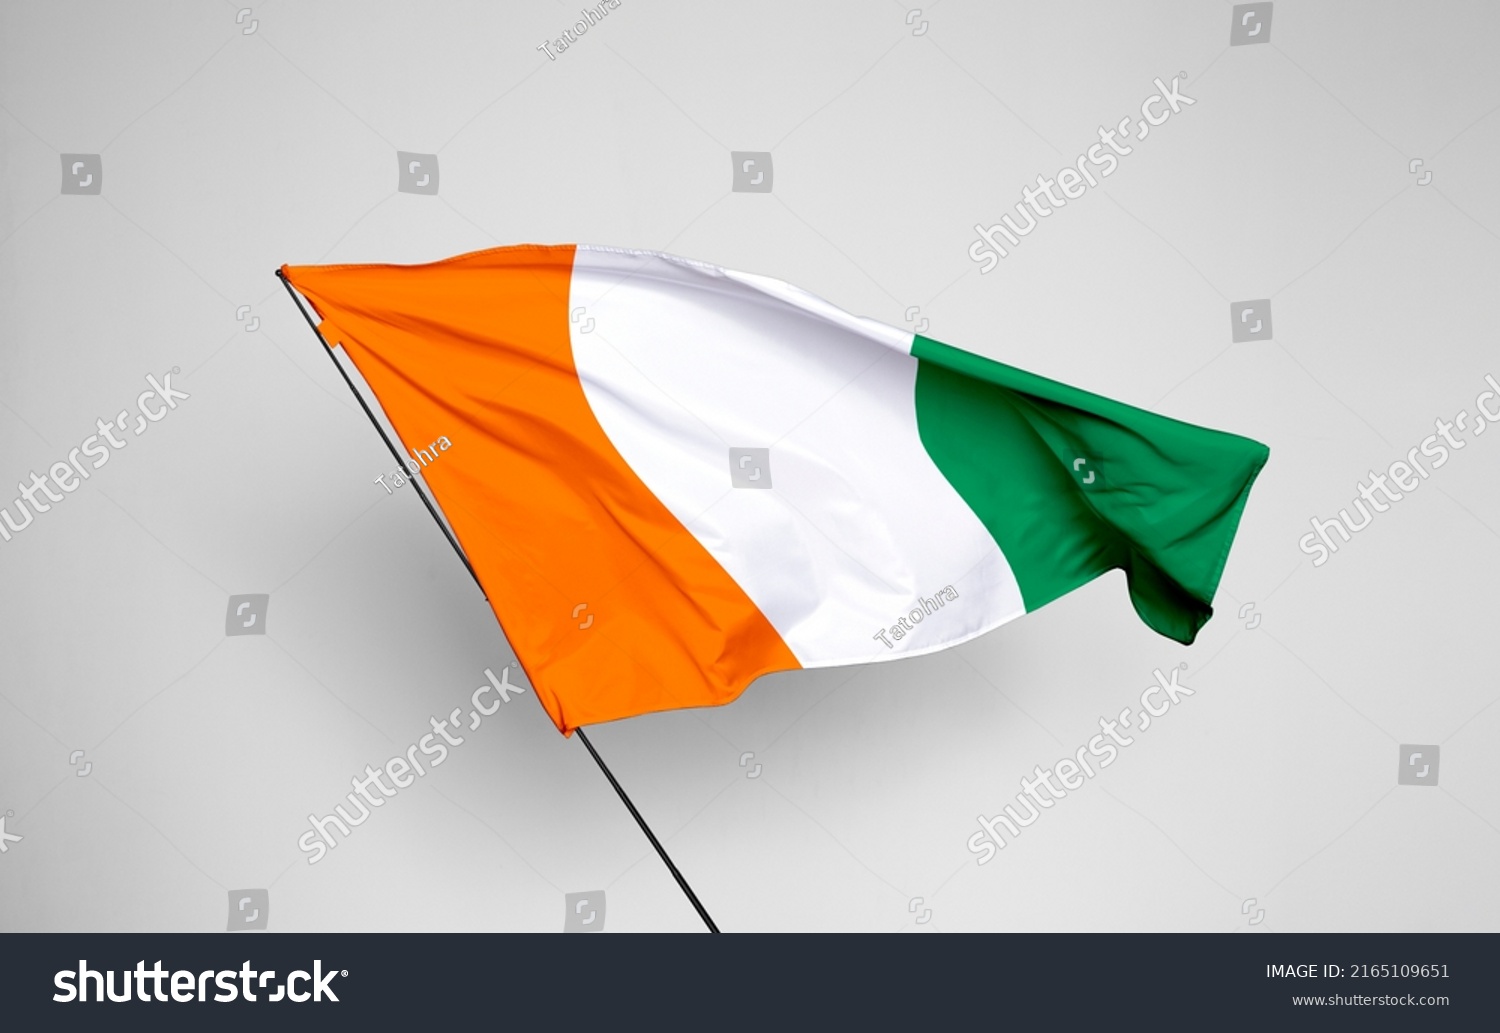 Ivory Coast flag isolated on white background with clipping path. flag symbols of Ivory Coast. flag frame with empty space for your text. #2165109651